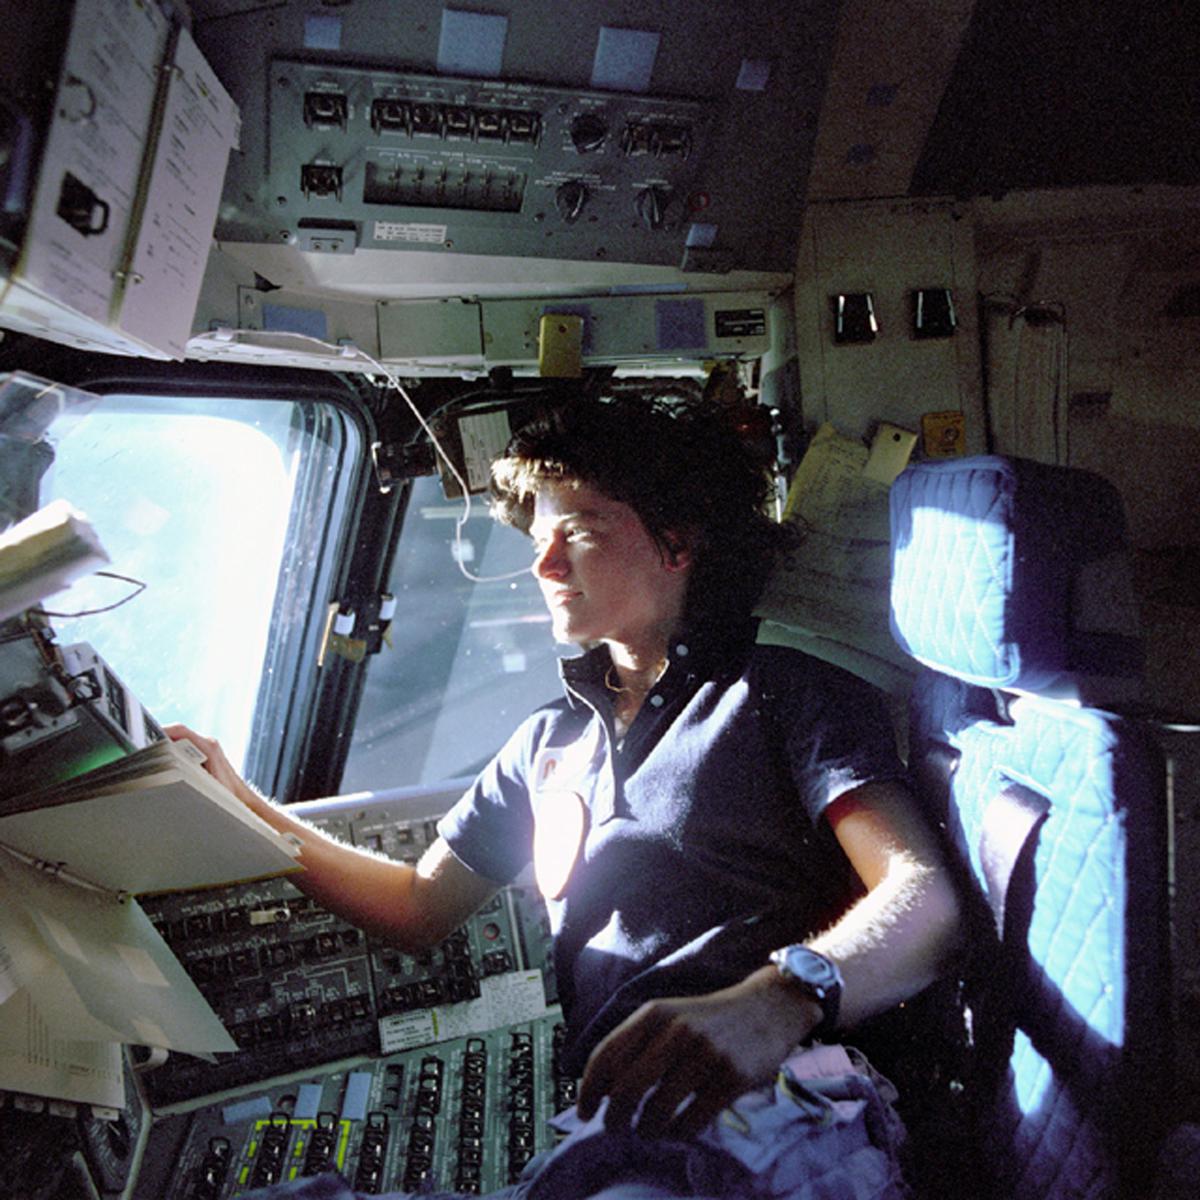 Ride monitoring control panels from the pilot’s chair on a space shuttle flight deck in June 1983. 